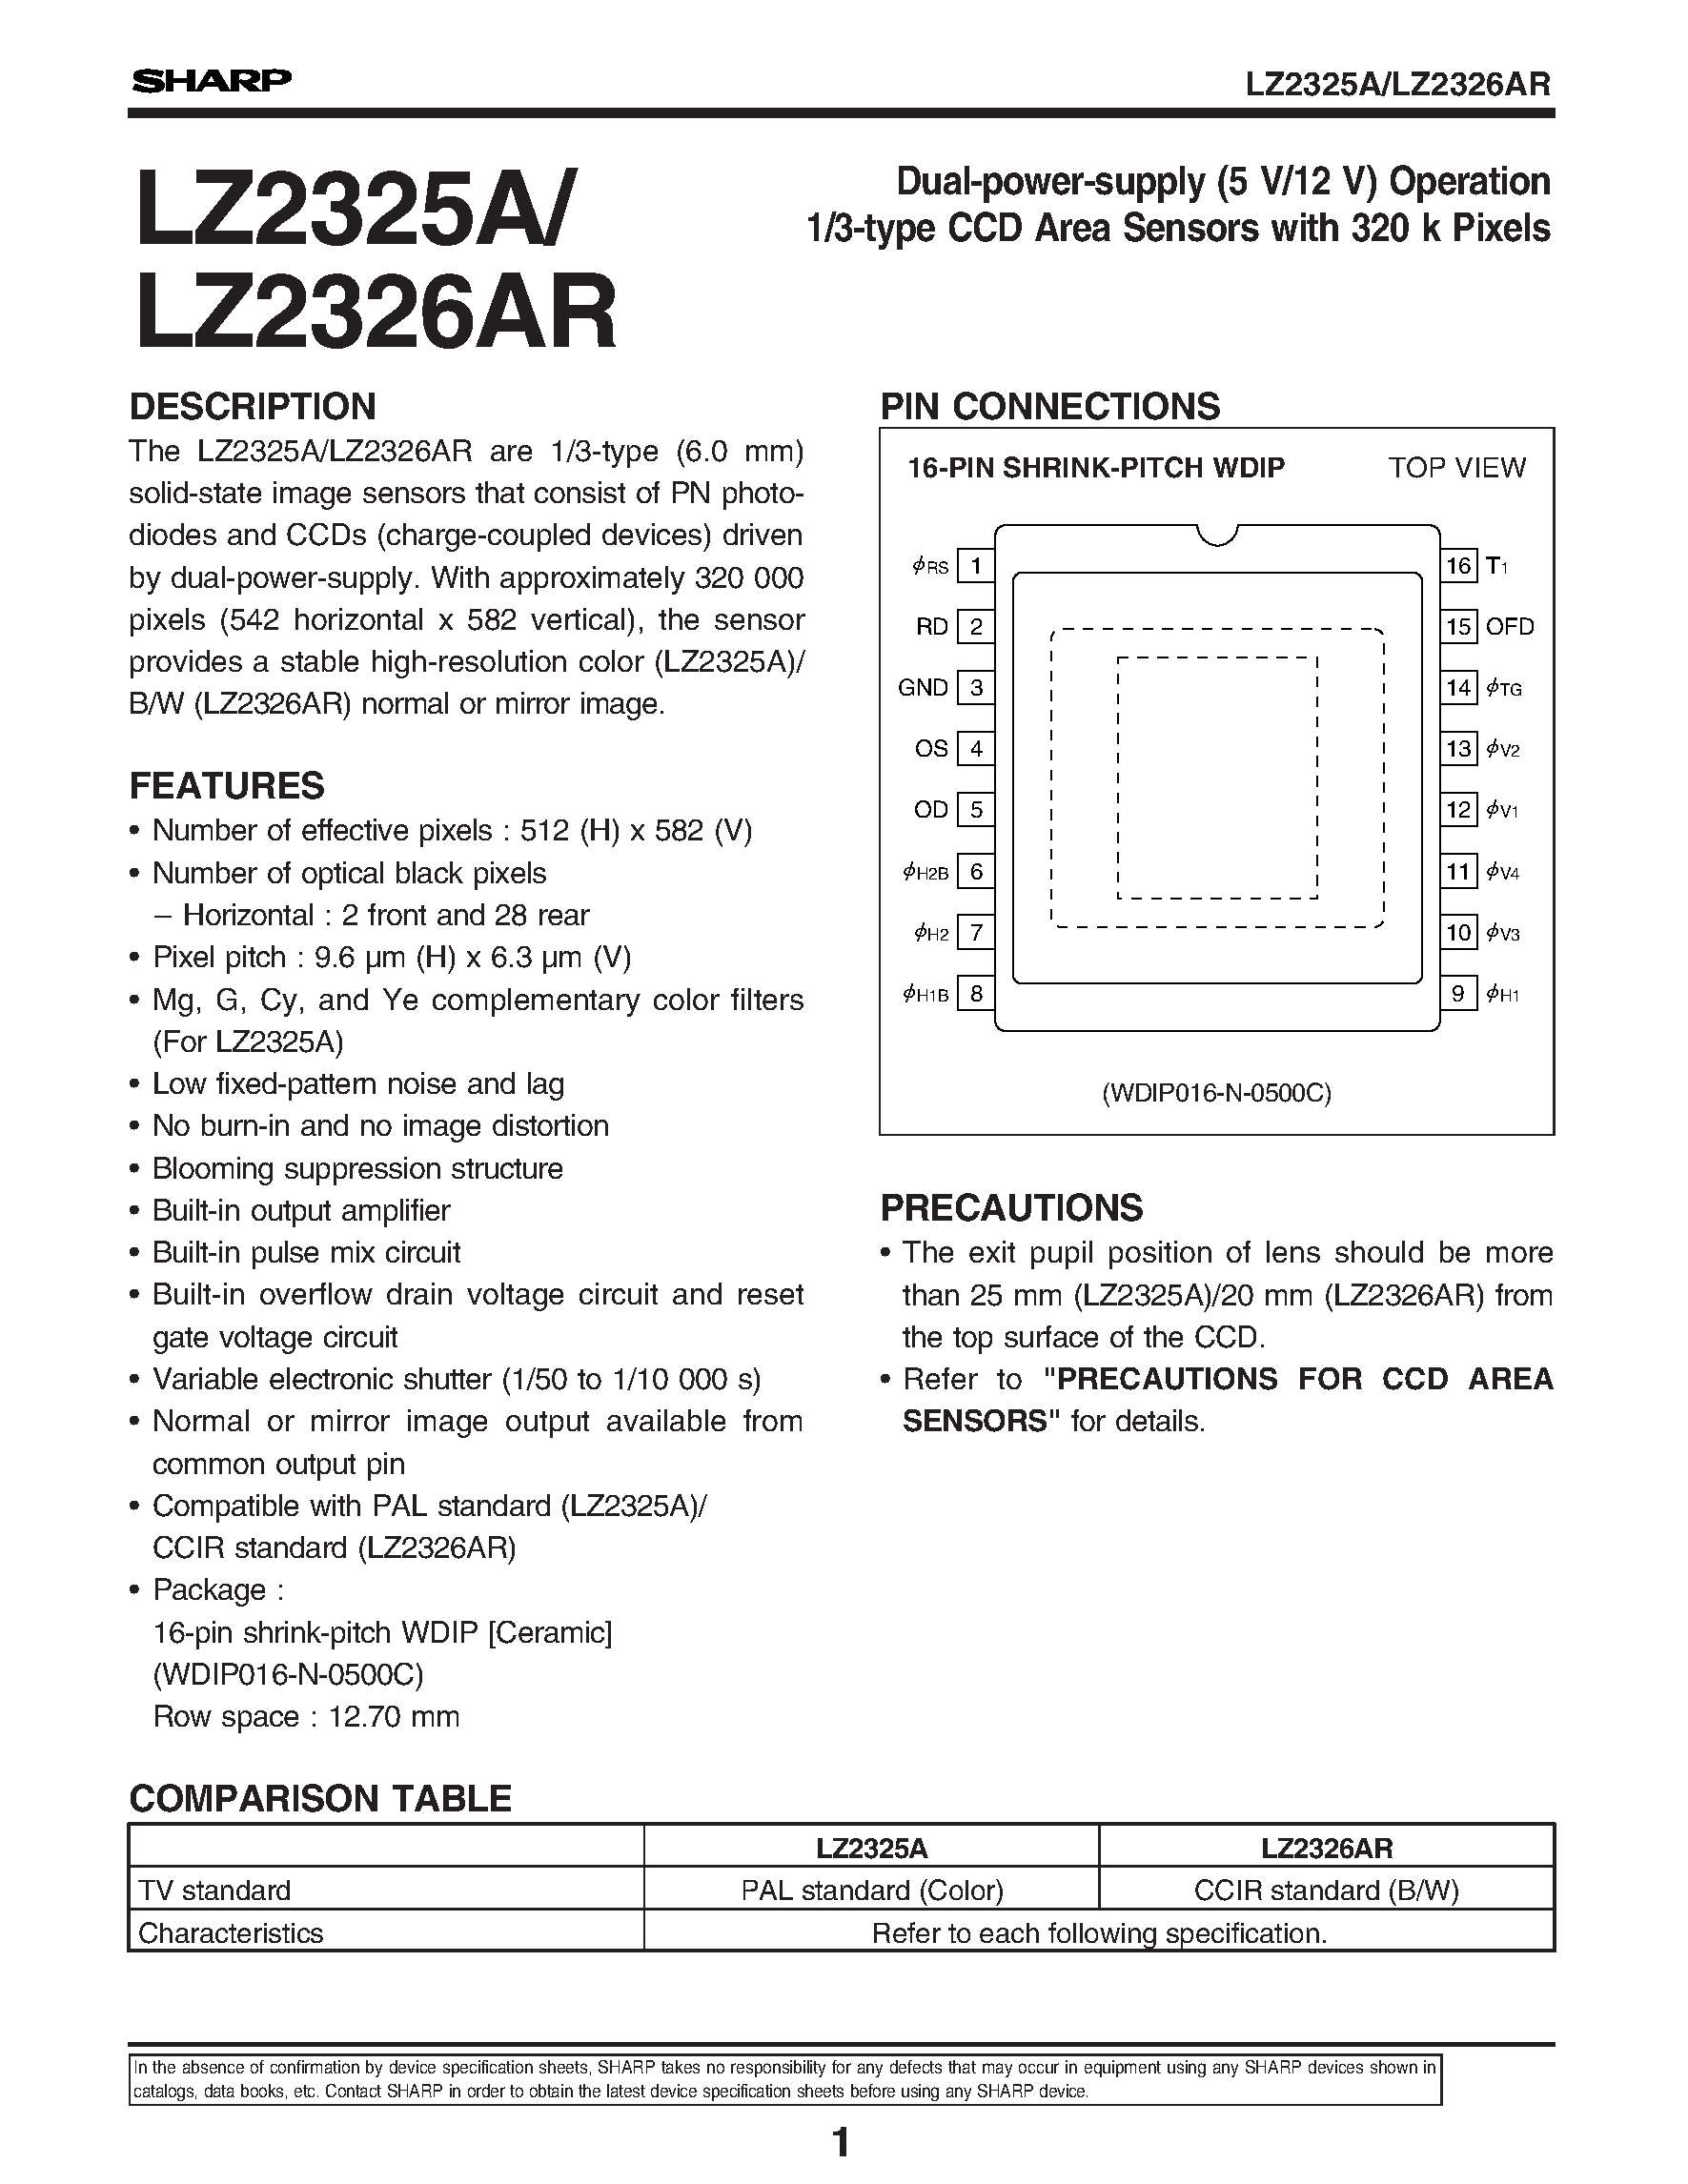 Datasheet LZ2326AR - Dual-power-supply (5 V/12 V) Operation 1/3-type CCD Area Sensors with 320 k Pixels page 1